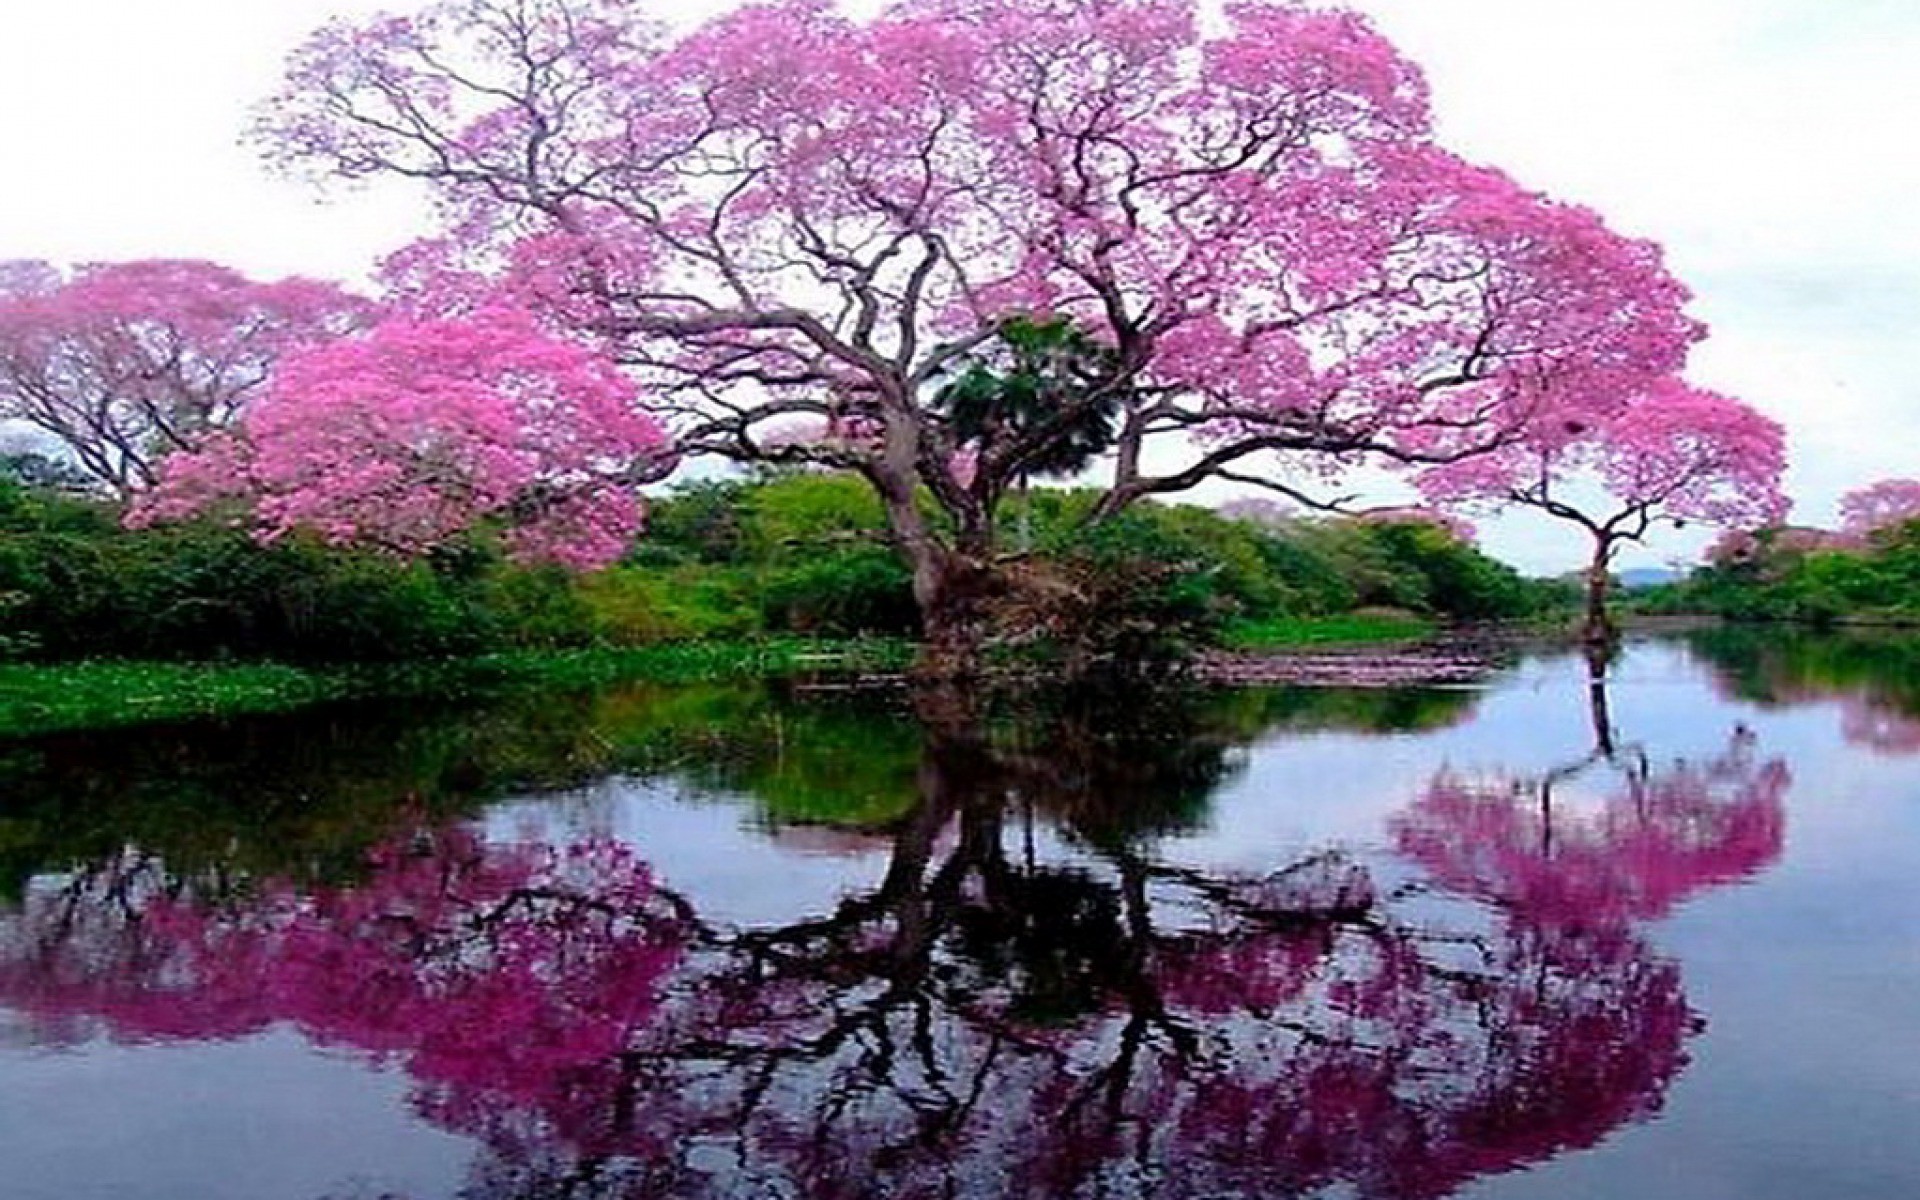 Flowering tree by the lake wallpapers and images - wallpapers, pictures